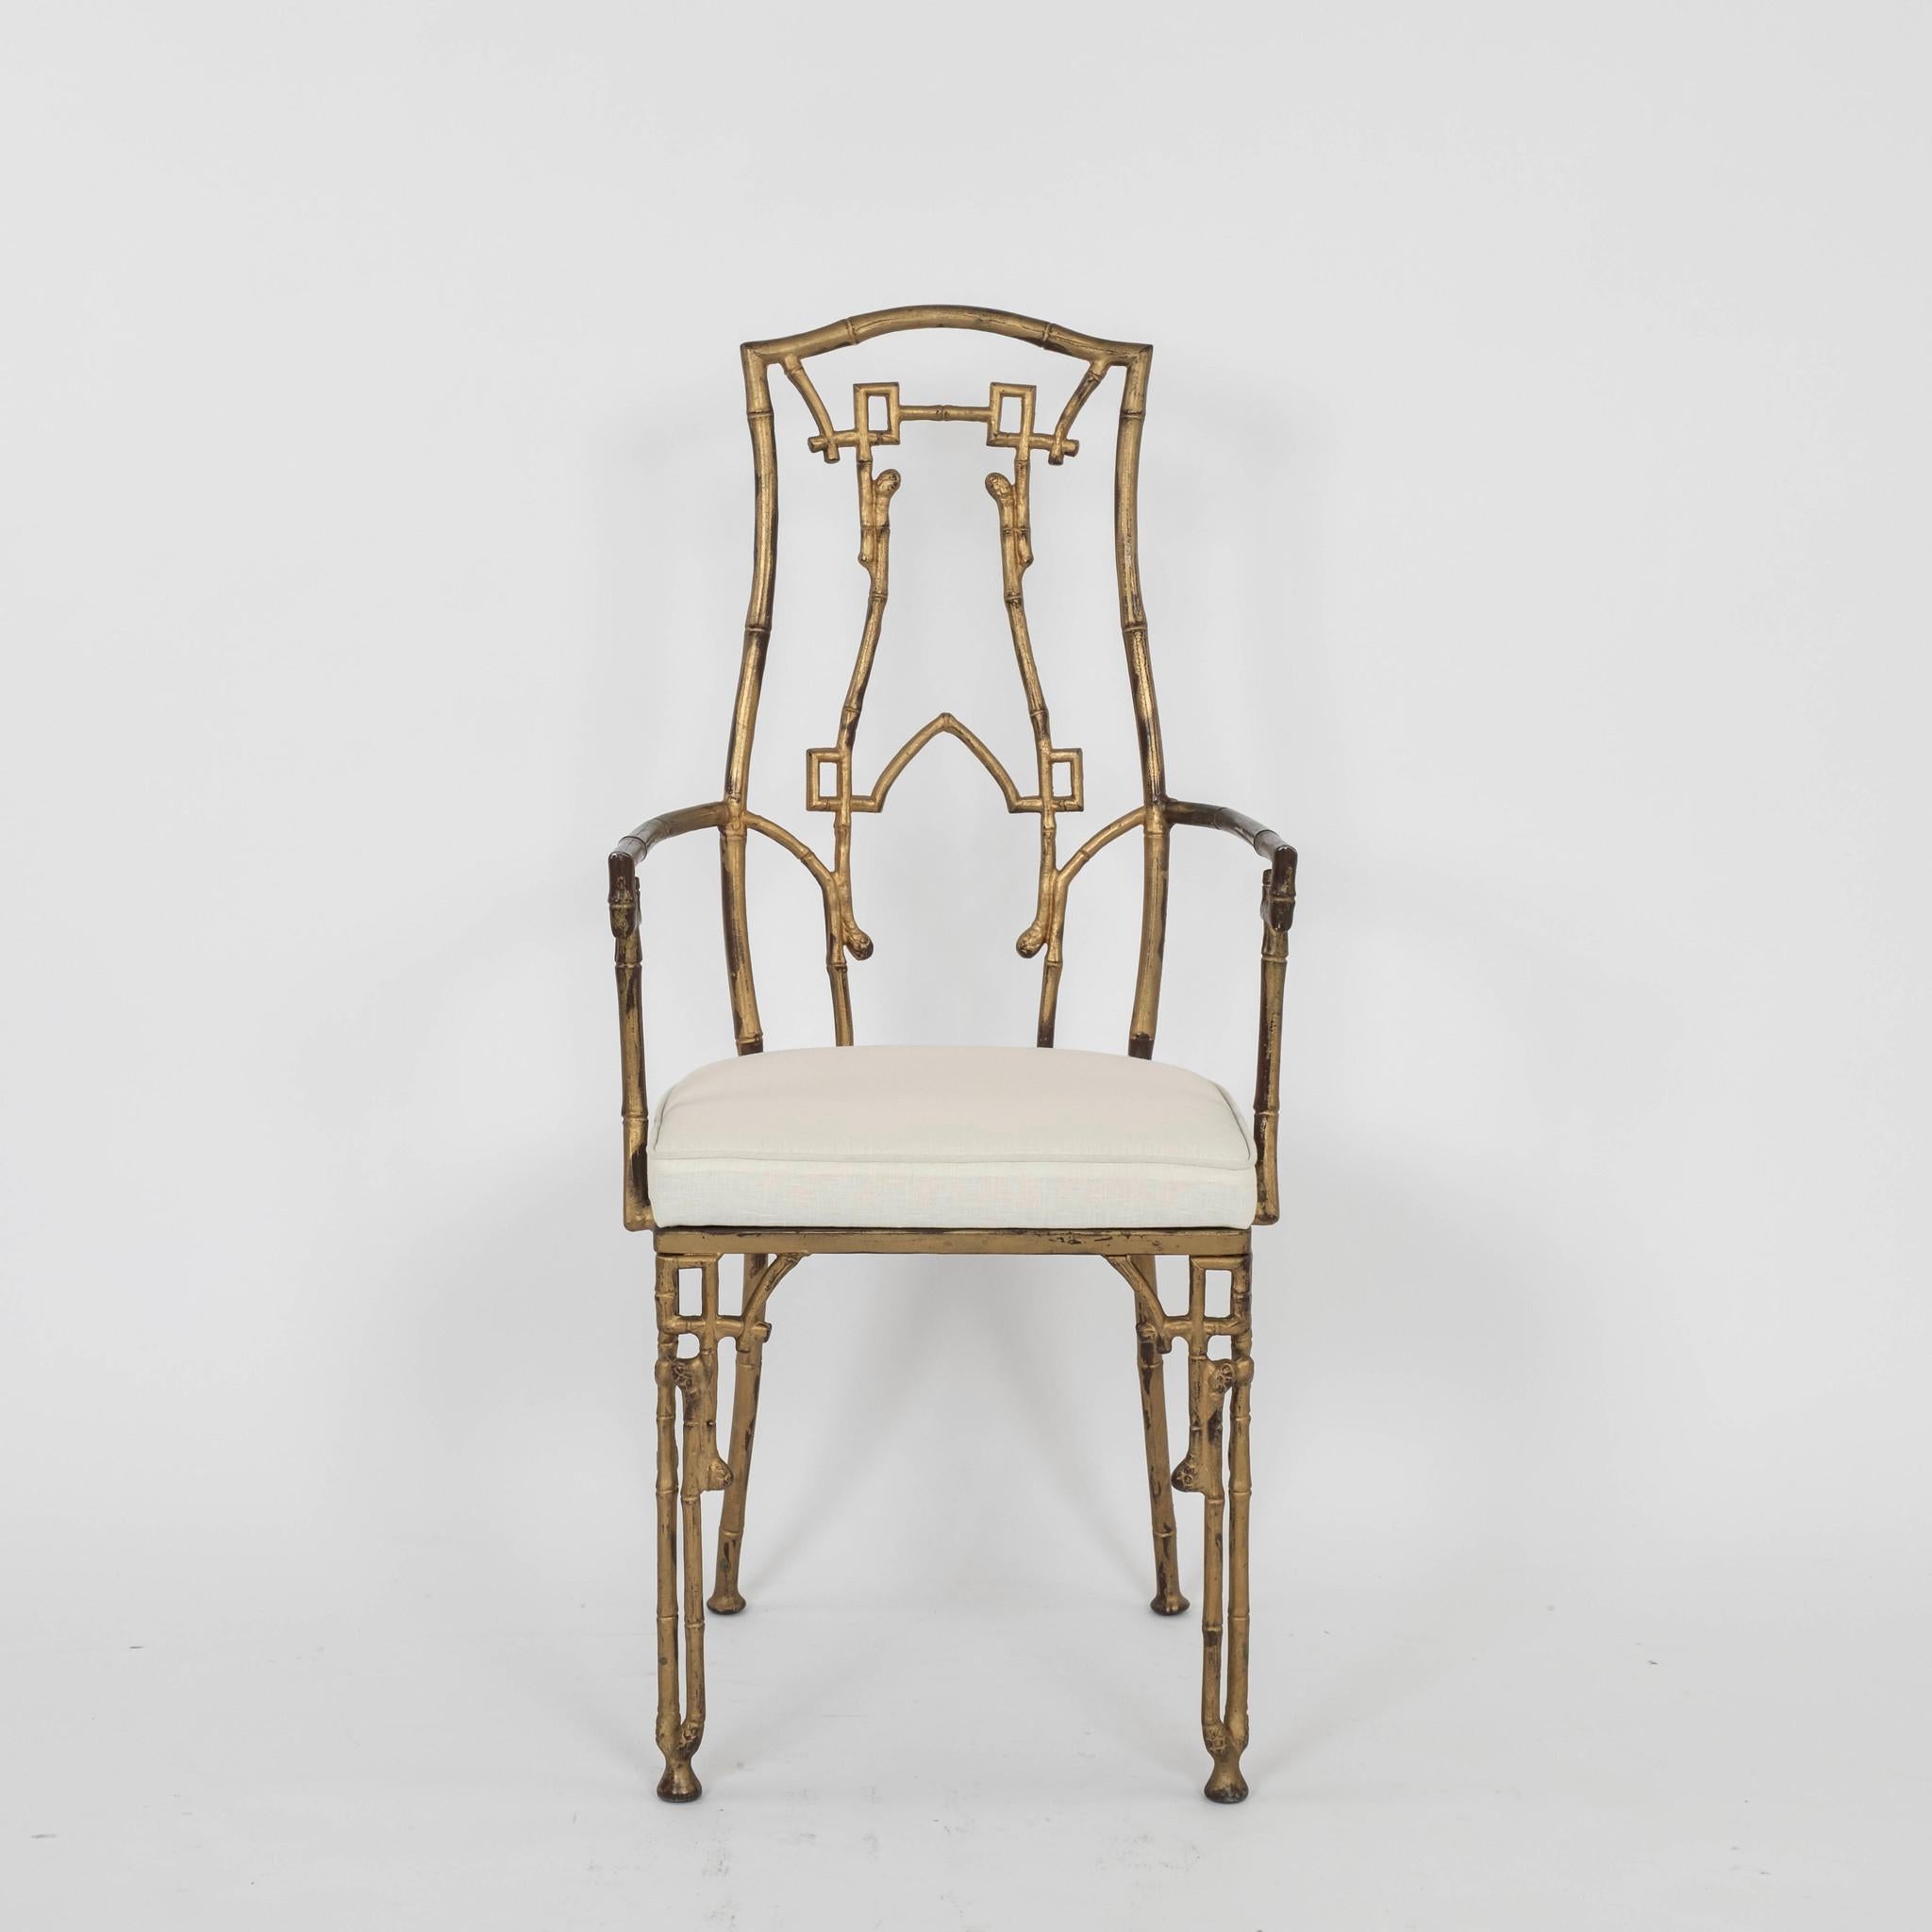 Vintage aesthetic style gilt metal bamboo arm chair.